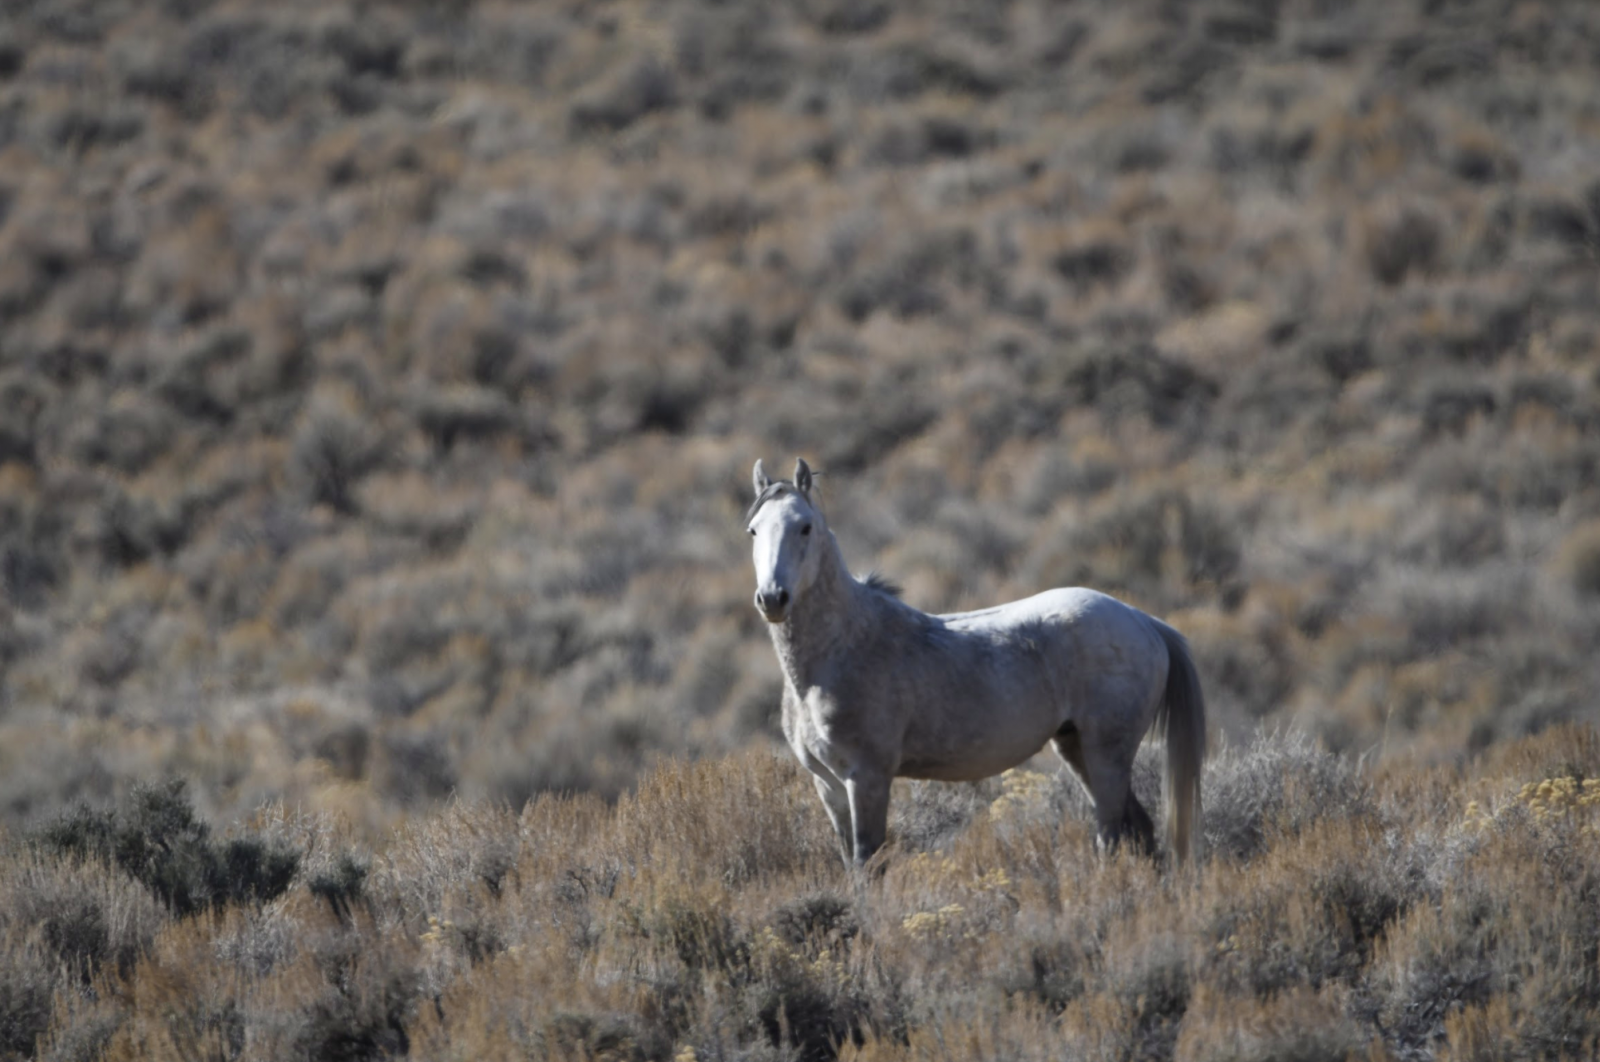 History of America's Wild Horses | American Wild Horse Campaign